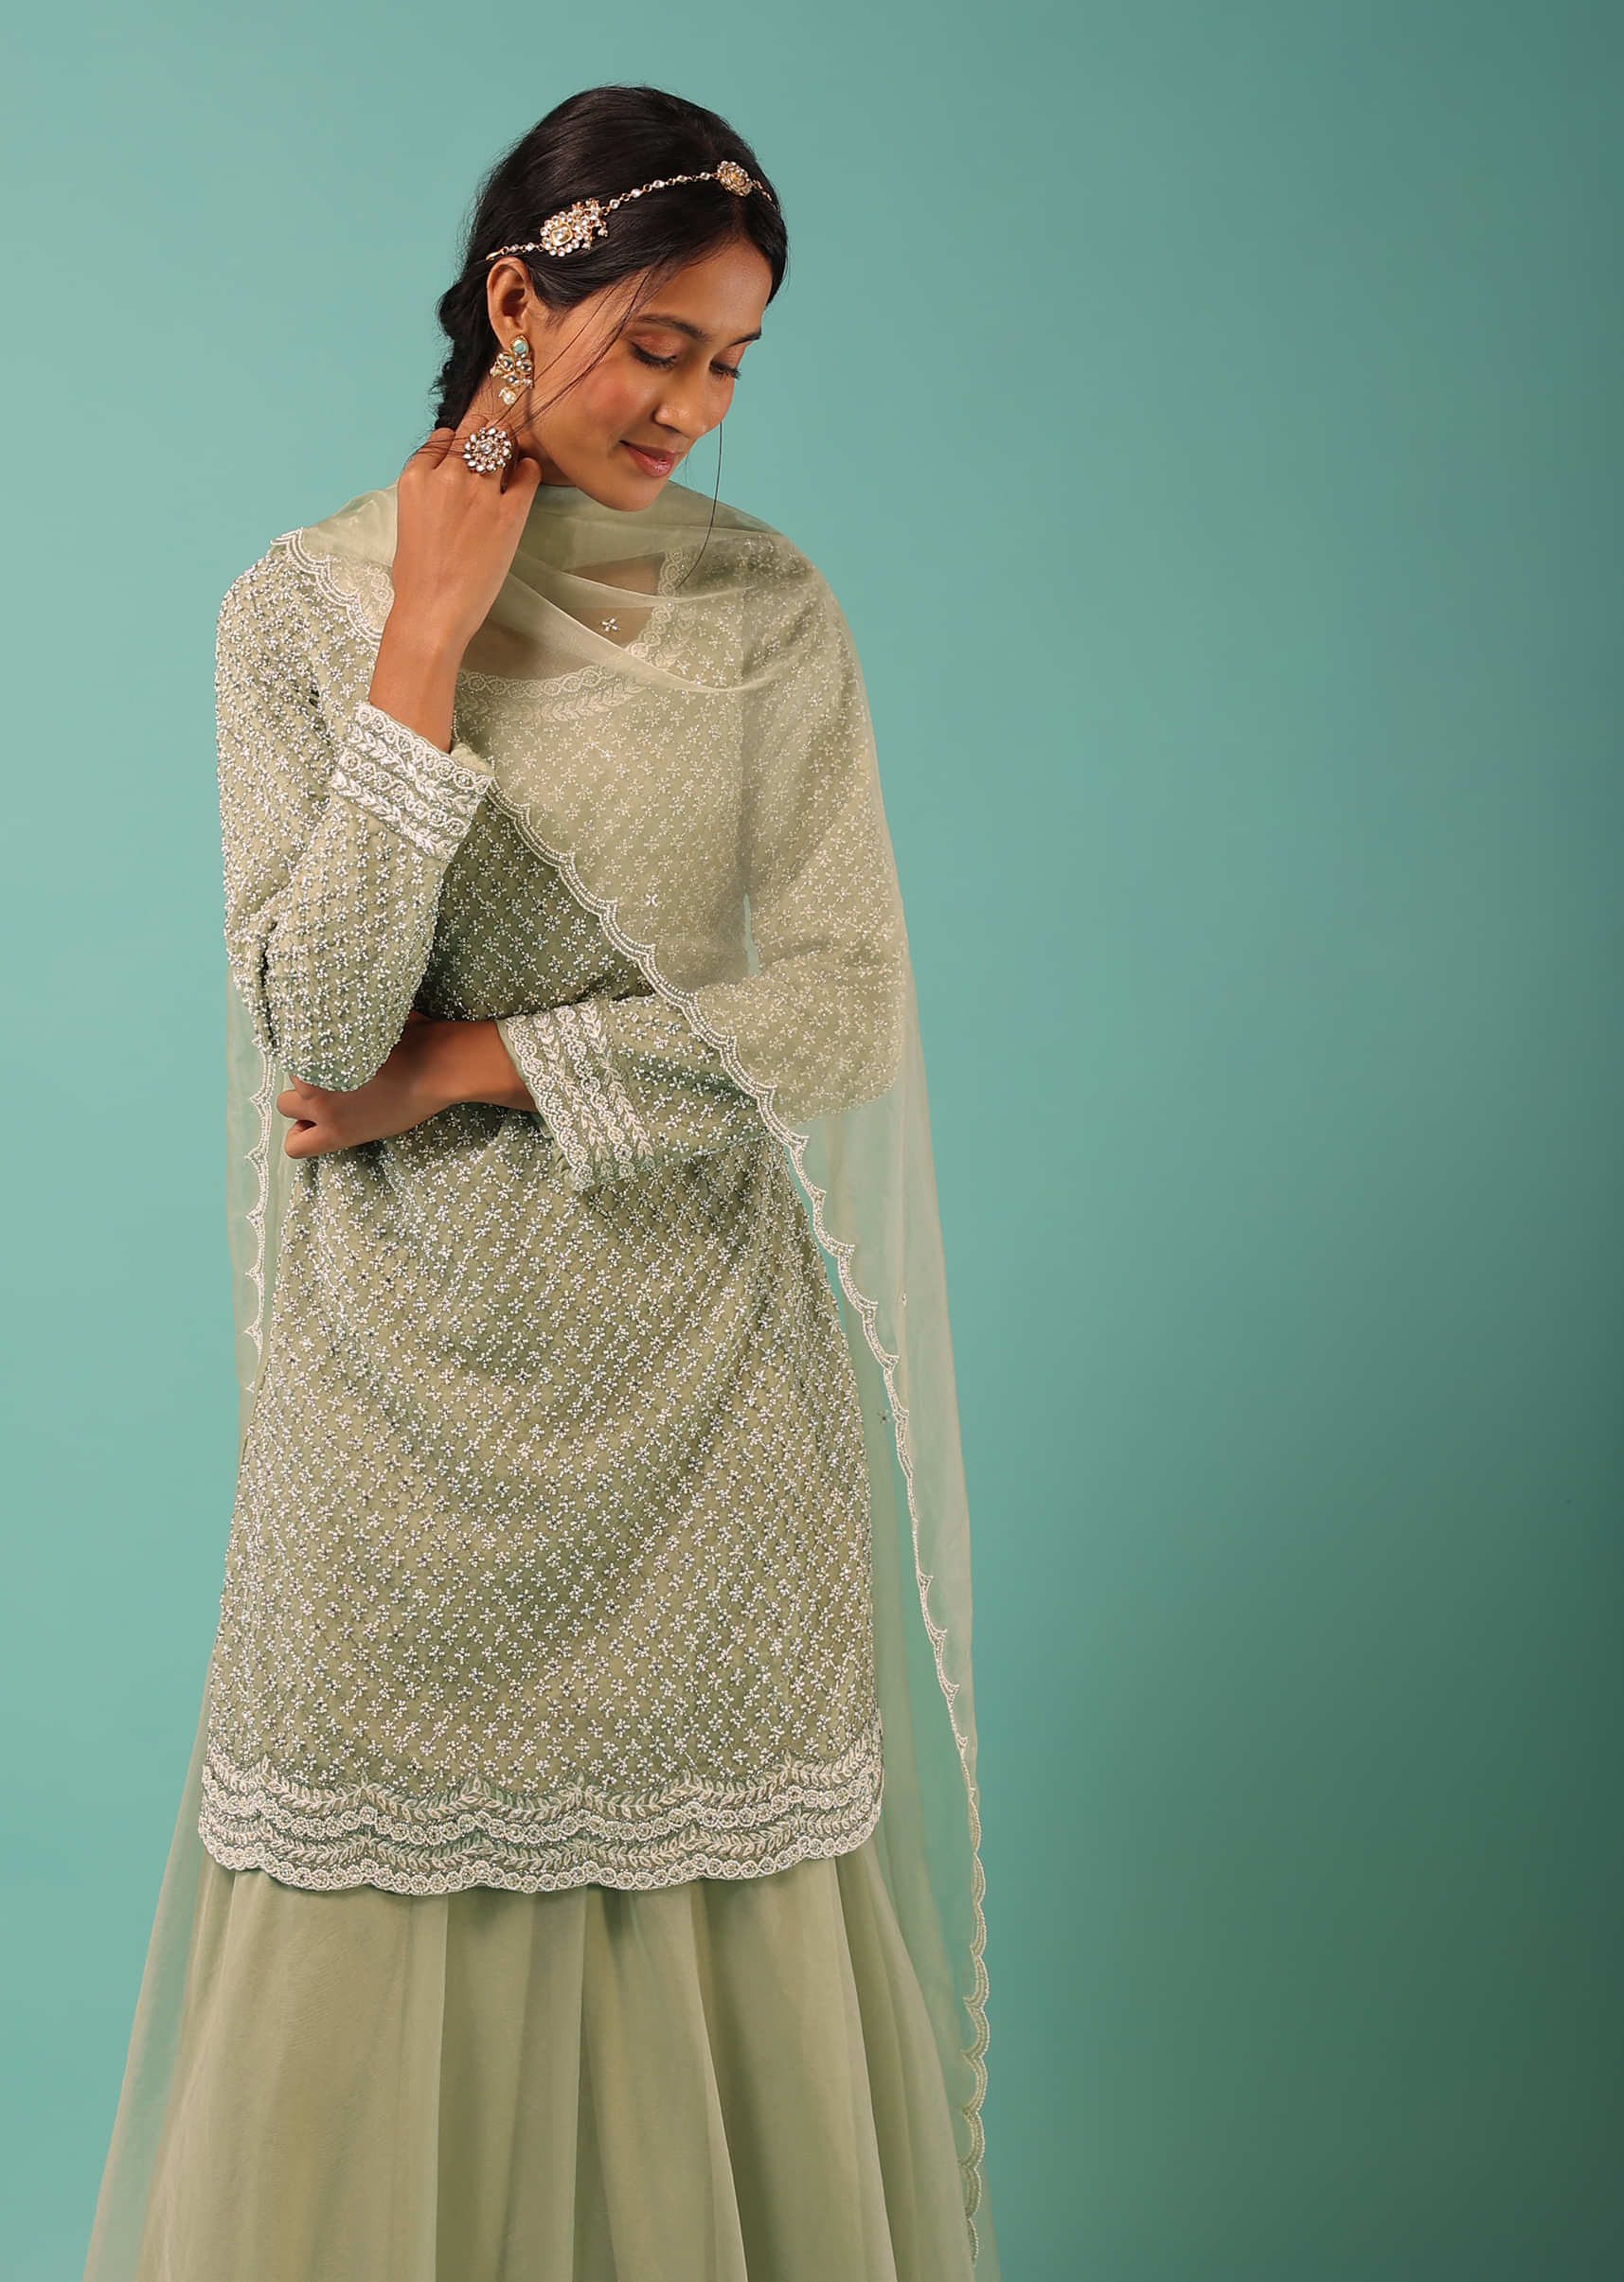 Pista Green Palazzo Suit With Embroidered Mesh Design